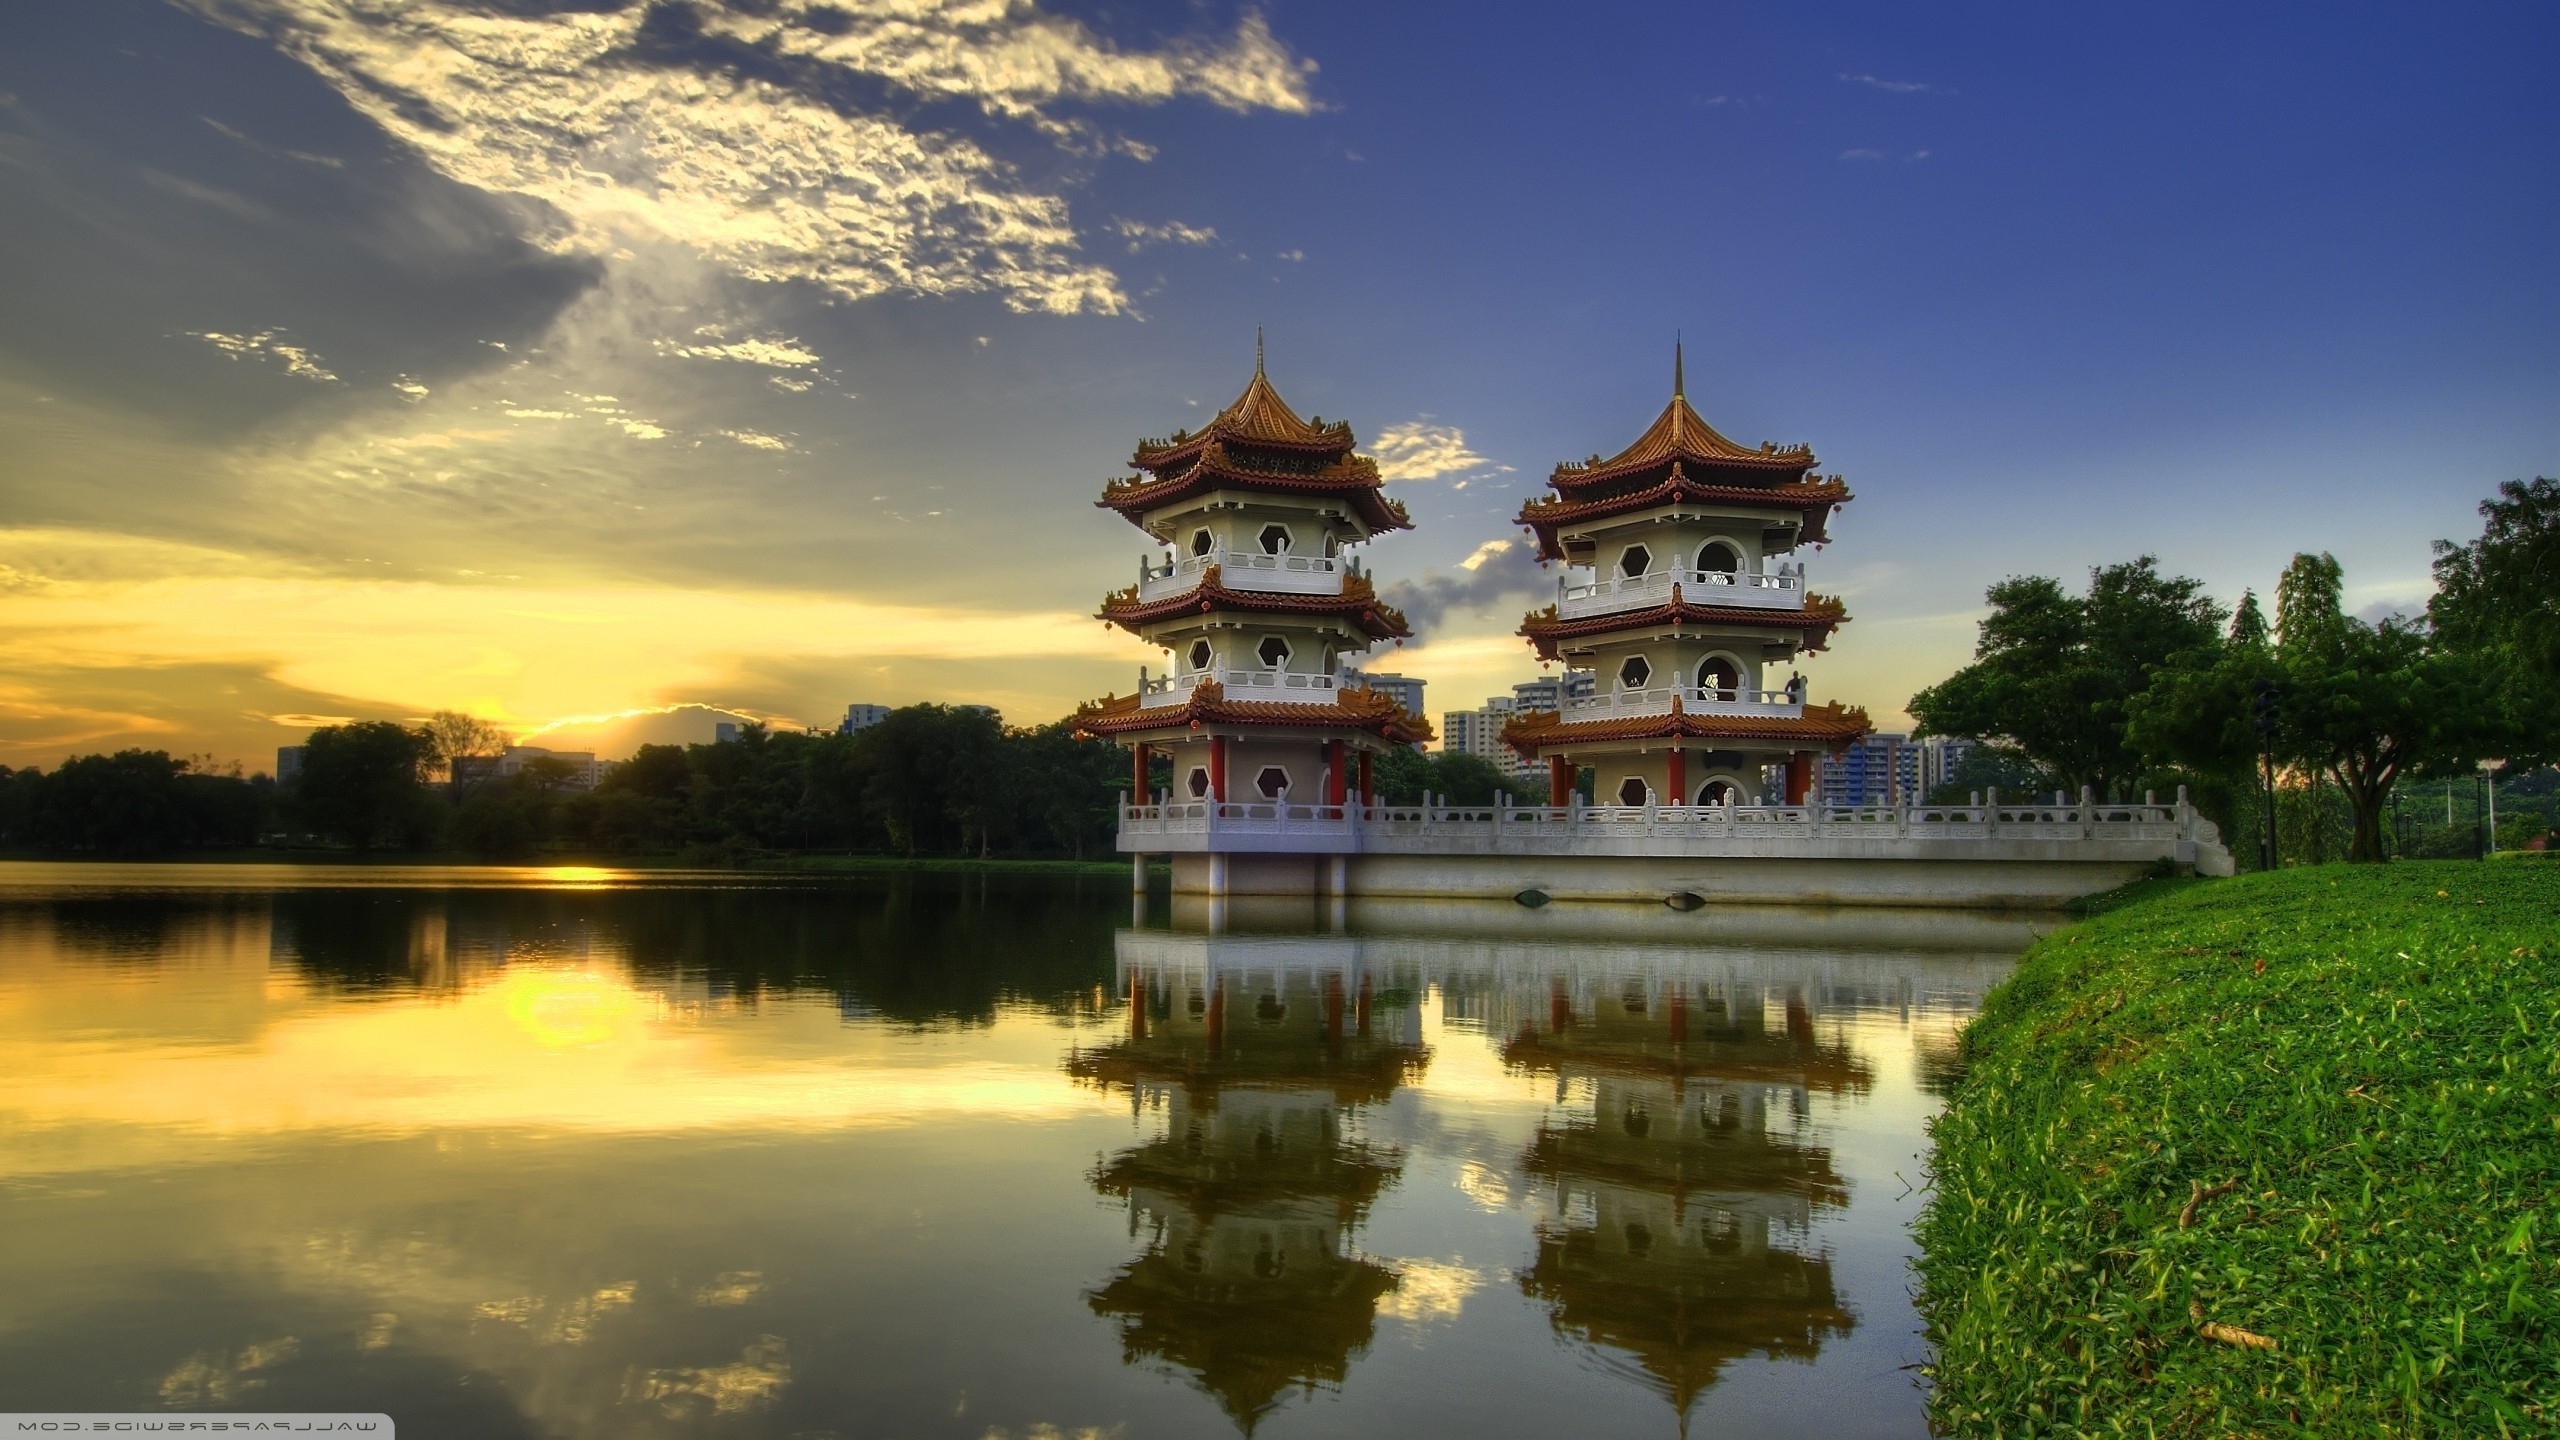 architecture, Nature, Landscape, Trees, Forest, Asian Architecture, Singapore, Pagoda, Lake, Grass, Water, Reflection, Clouds, Sun Wallpaper